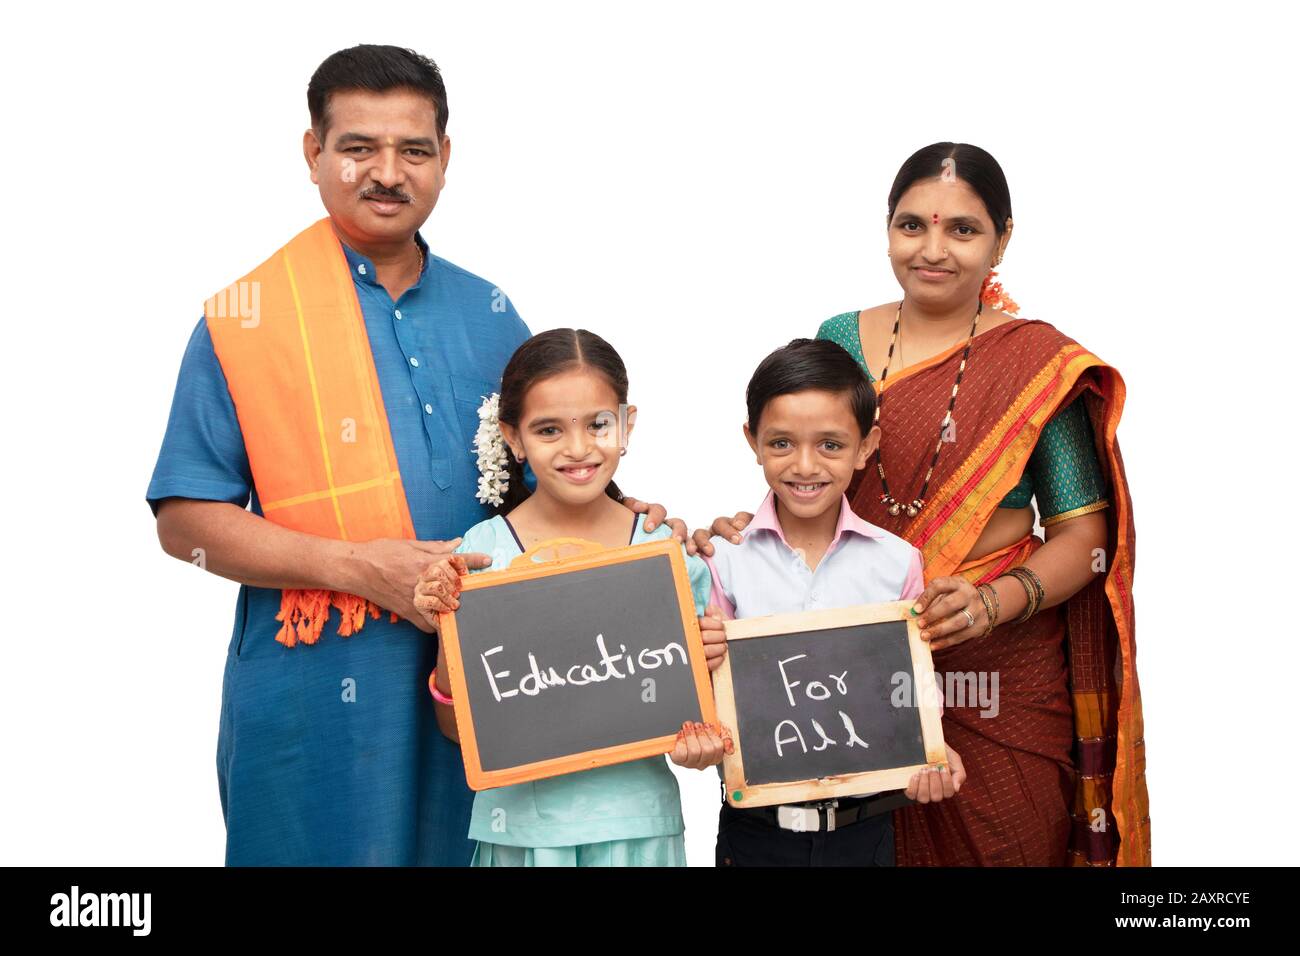 Concept of Education for all children holding slate with traditional Indian family on isolated background Stock Photo